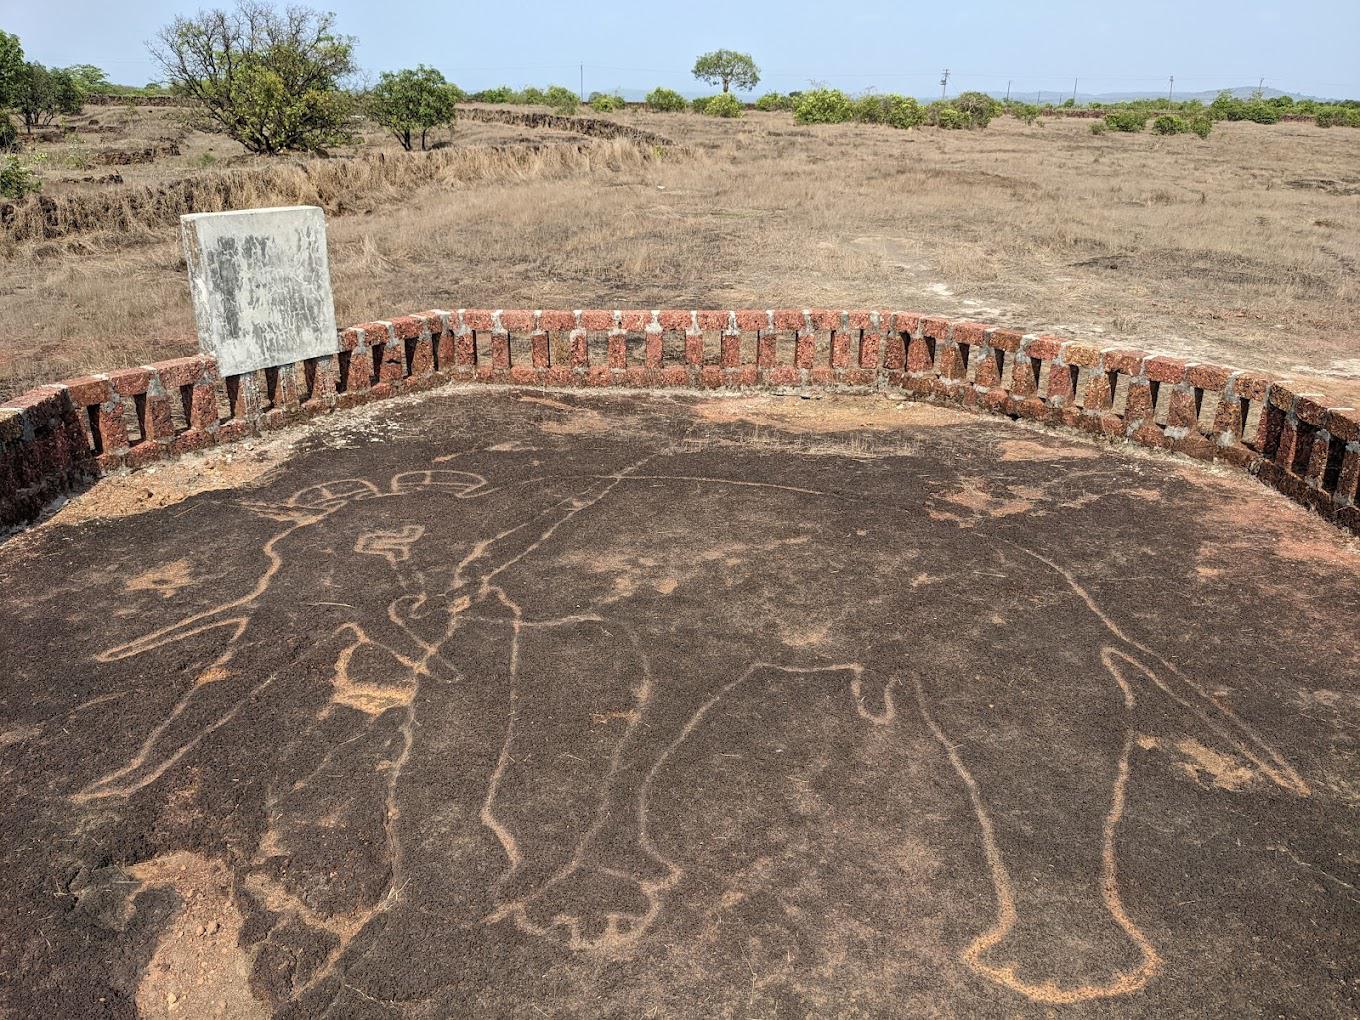 An Elephant petroglyph found in Ratnagiri Maharastra India with more then 1000 others, dated to about 10,000 to 12,000 BCE.jpg